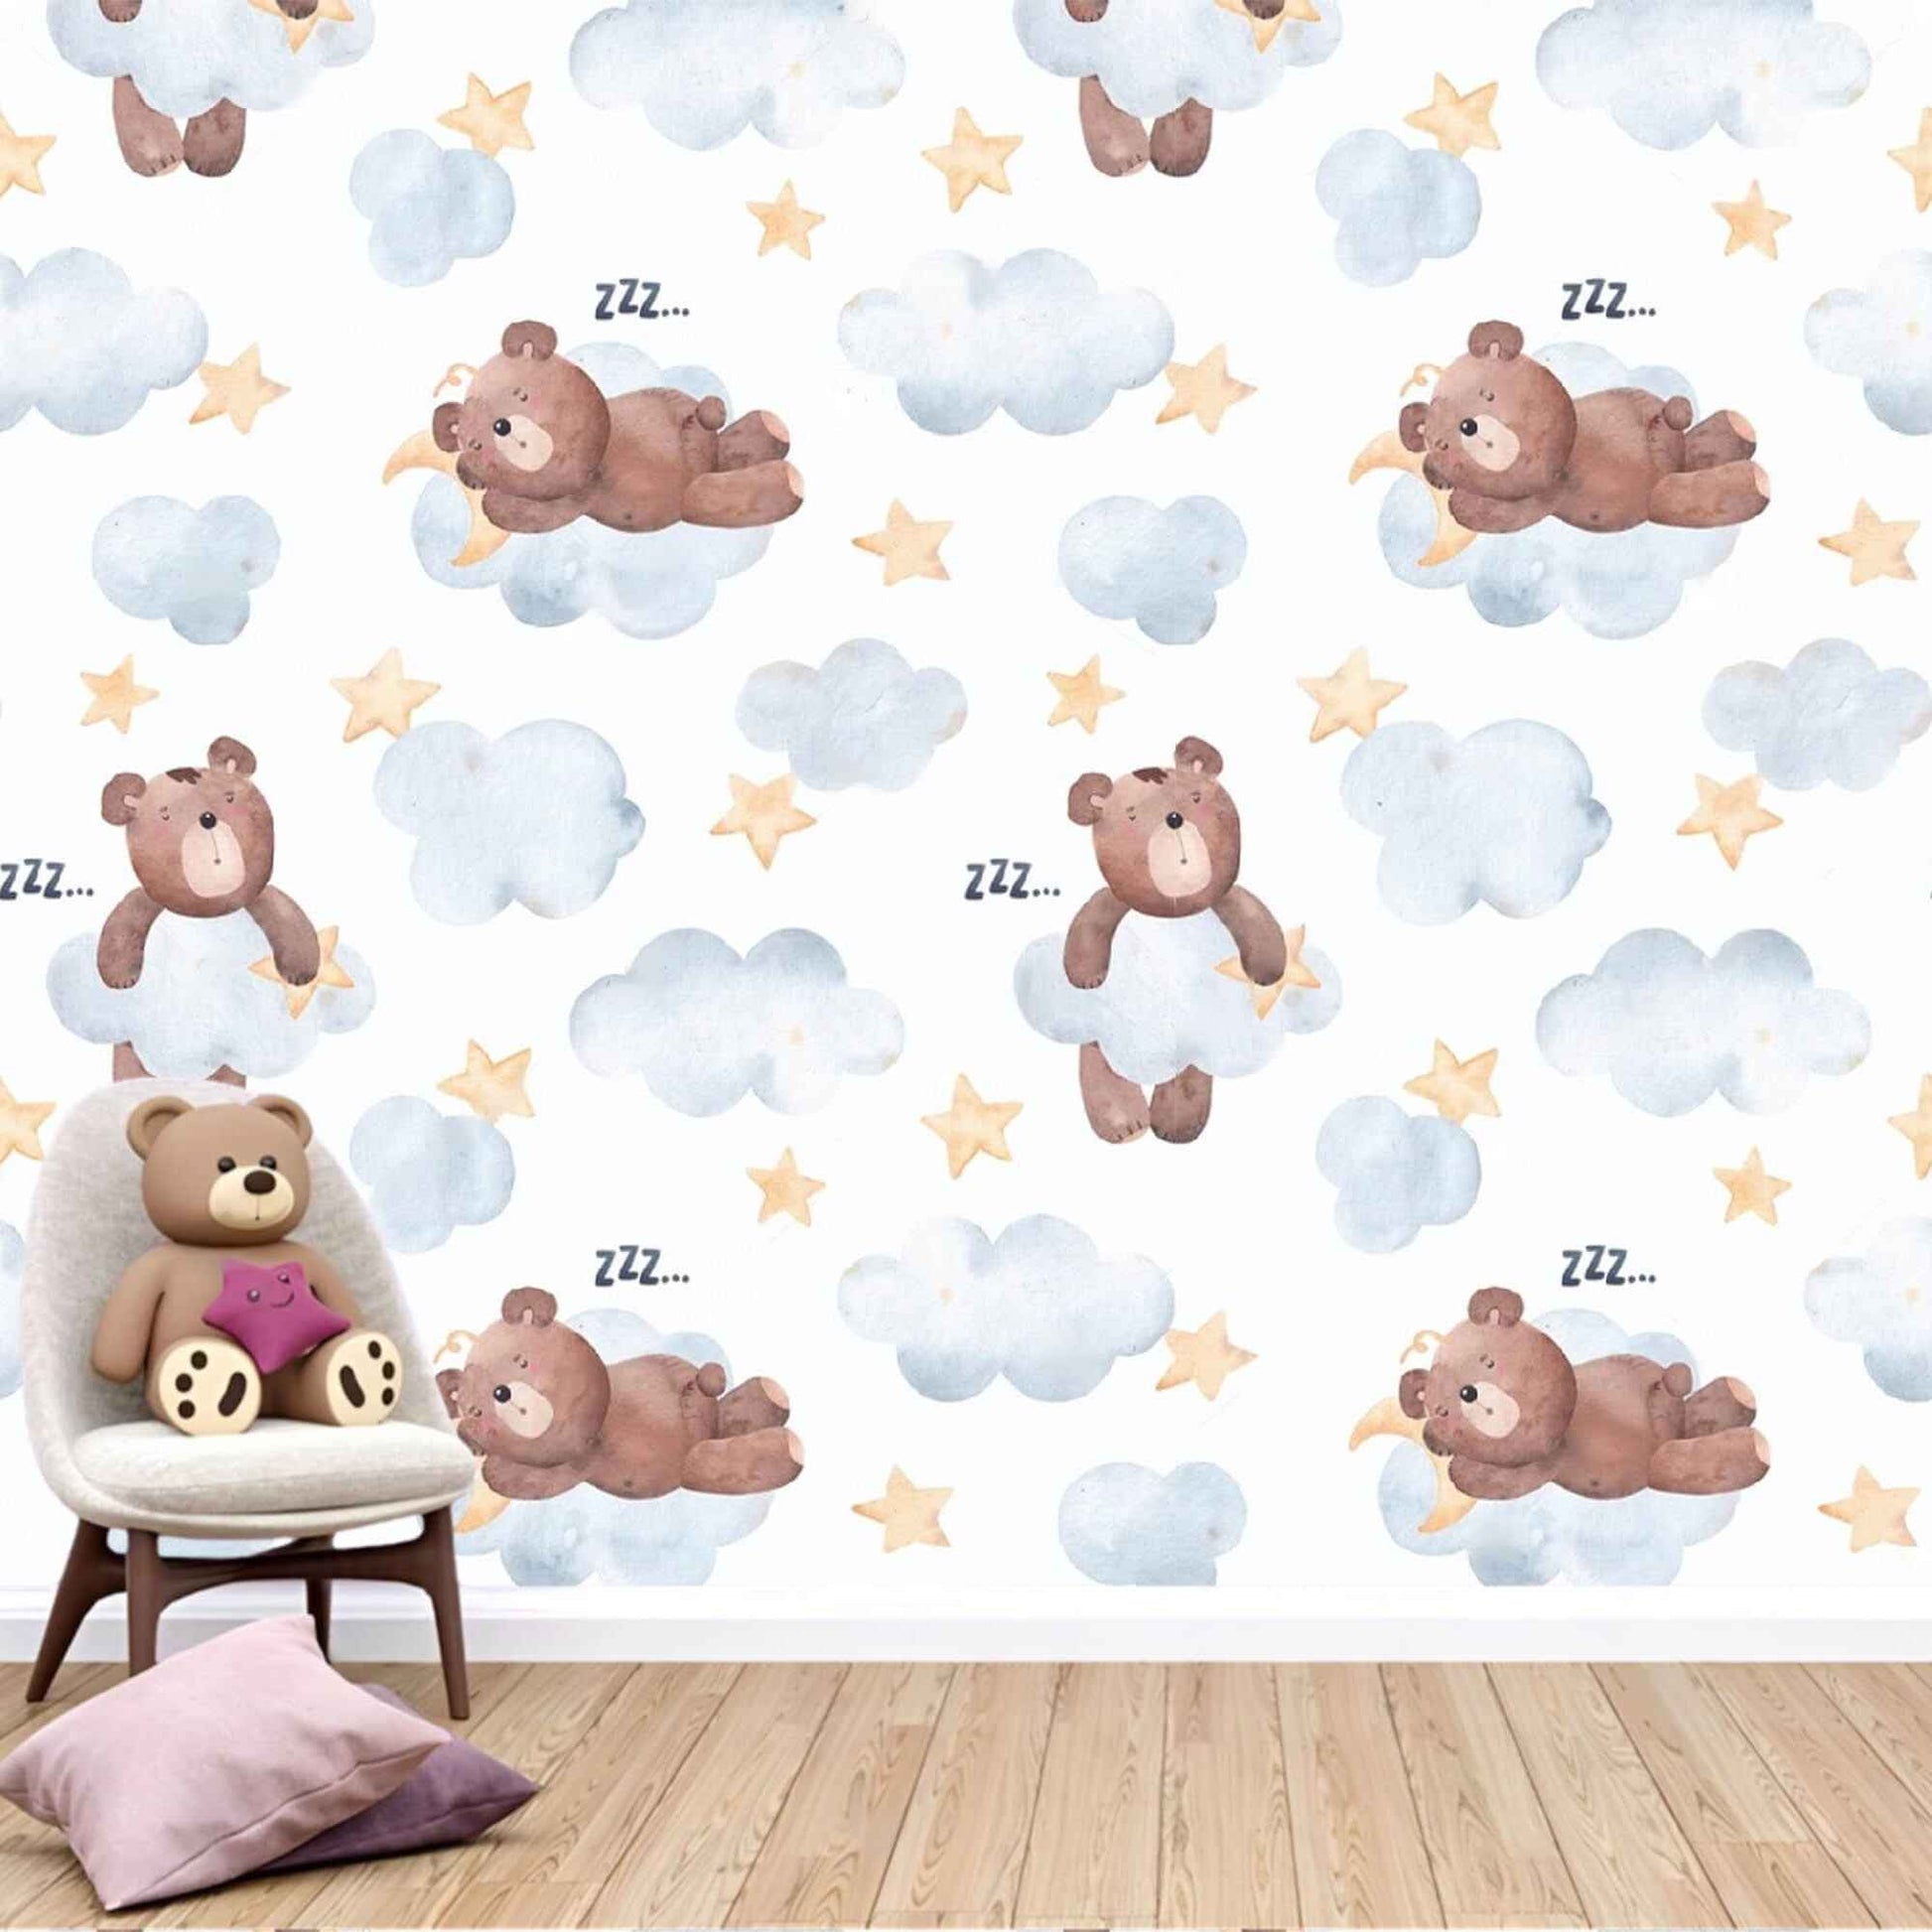 Teddy bear on clouds wallpaper in a baby's nursery, creating a whimsical and serene atmosphere.